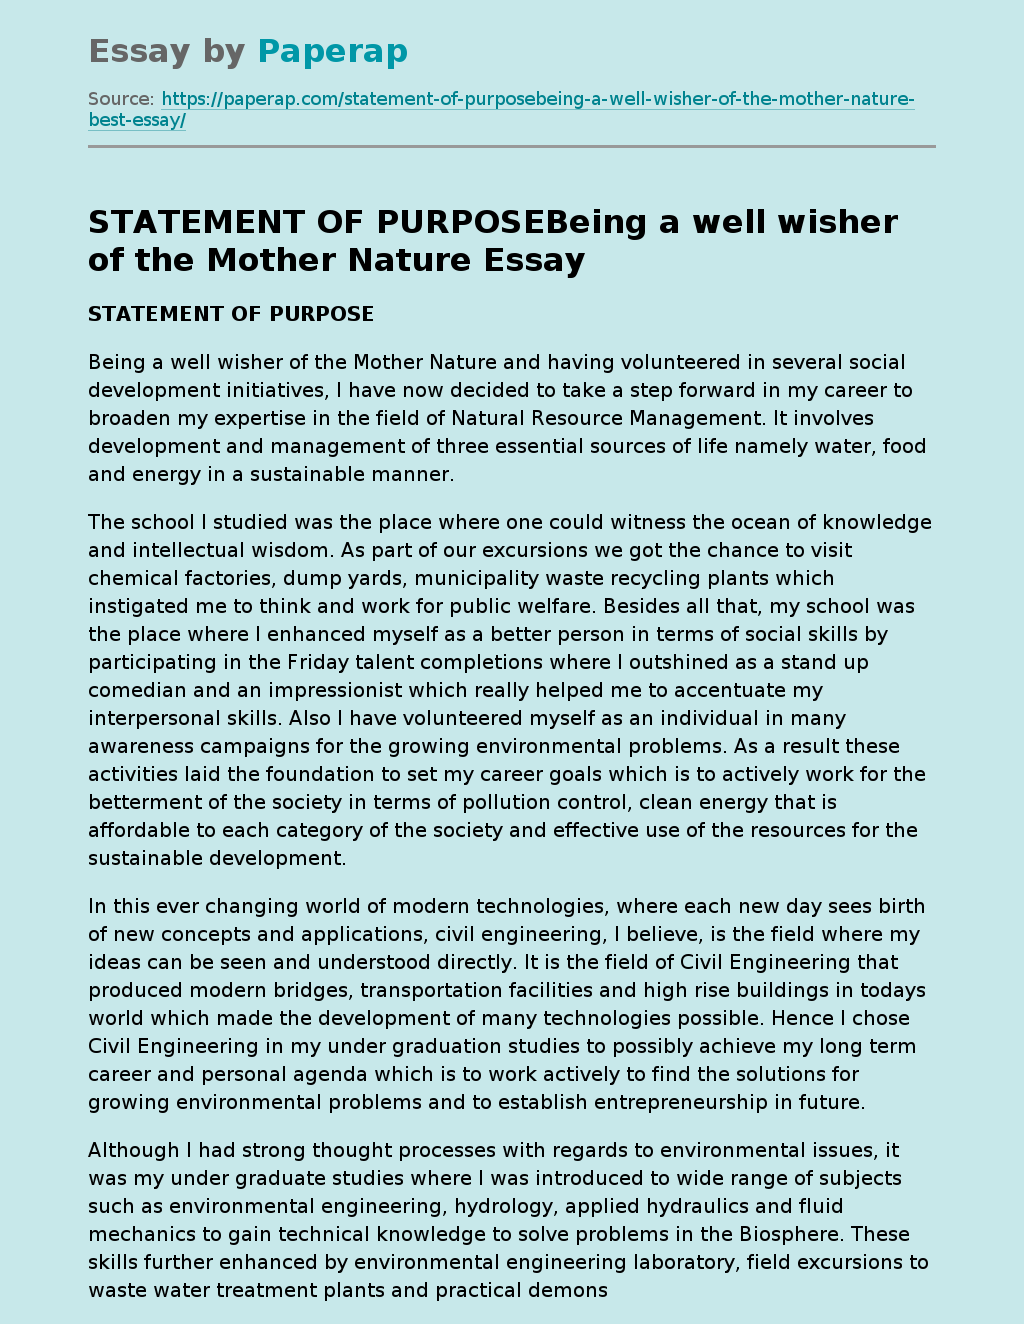 STATEMENT OF PURPOSEBeing a well wisher of the Mother Nature